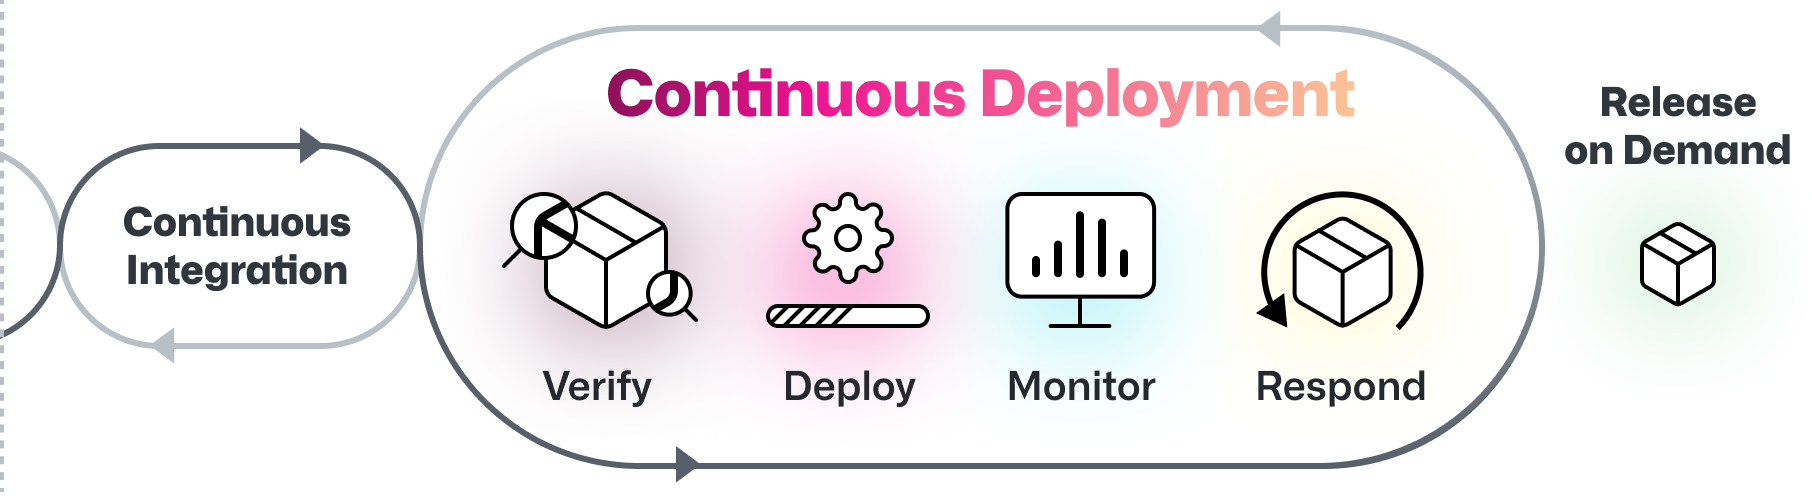 A continuous deployment pipeline model